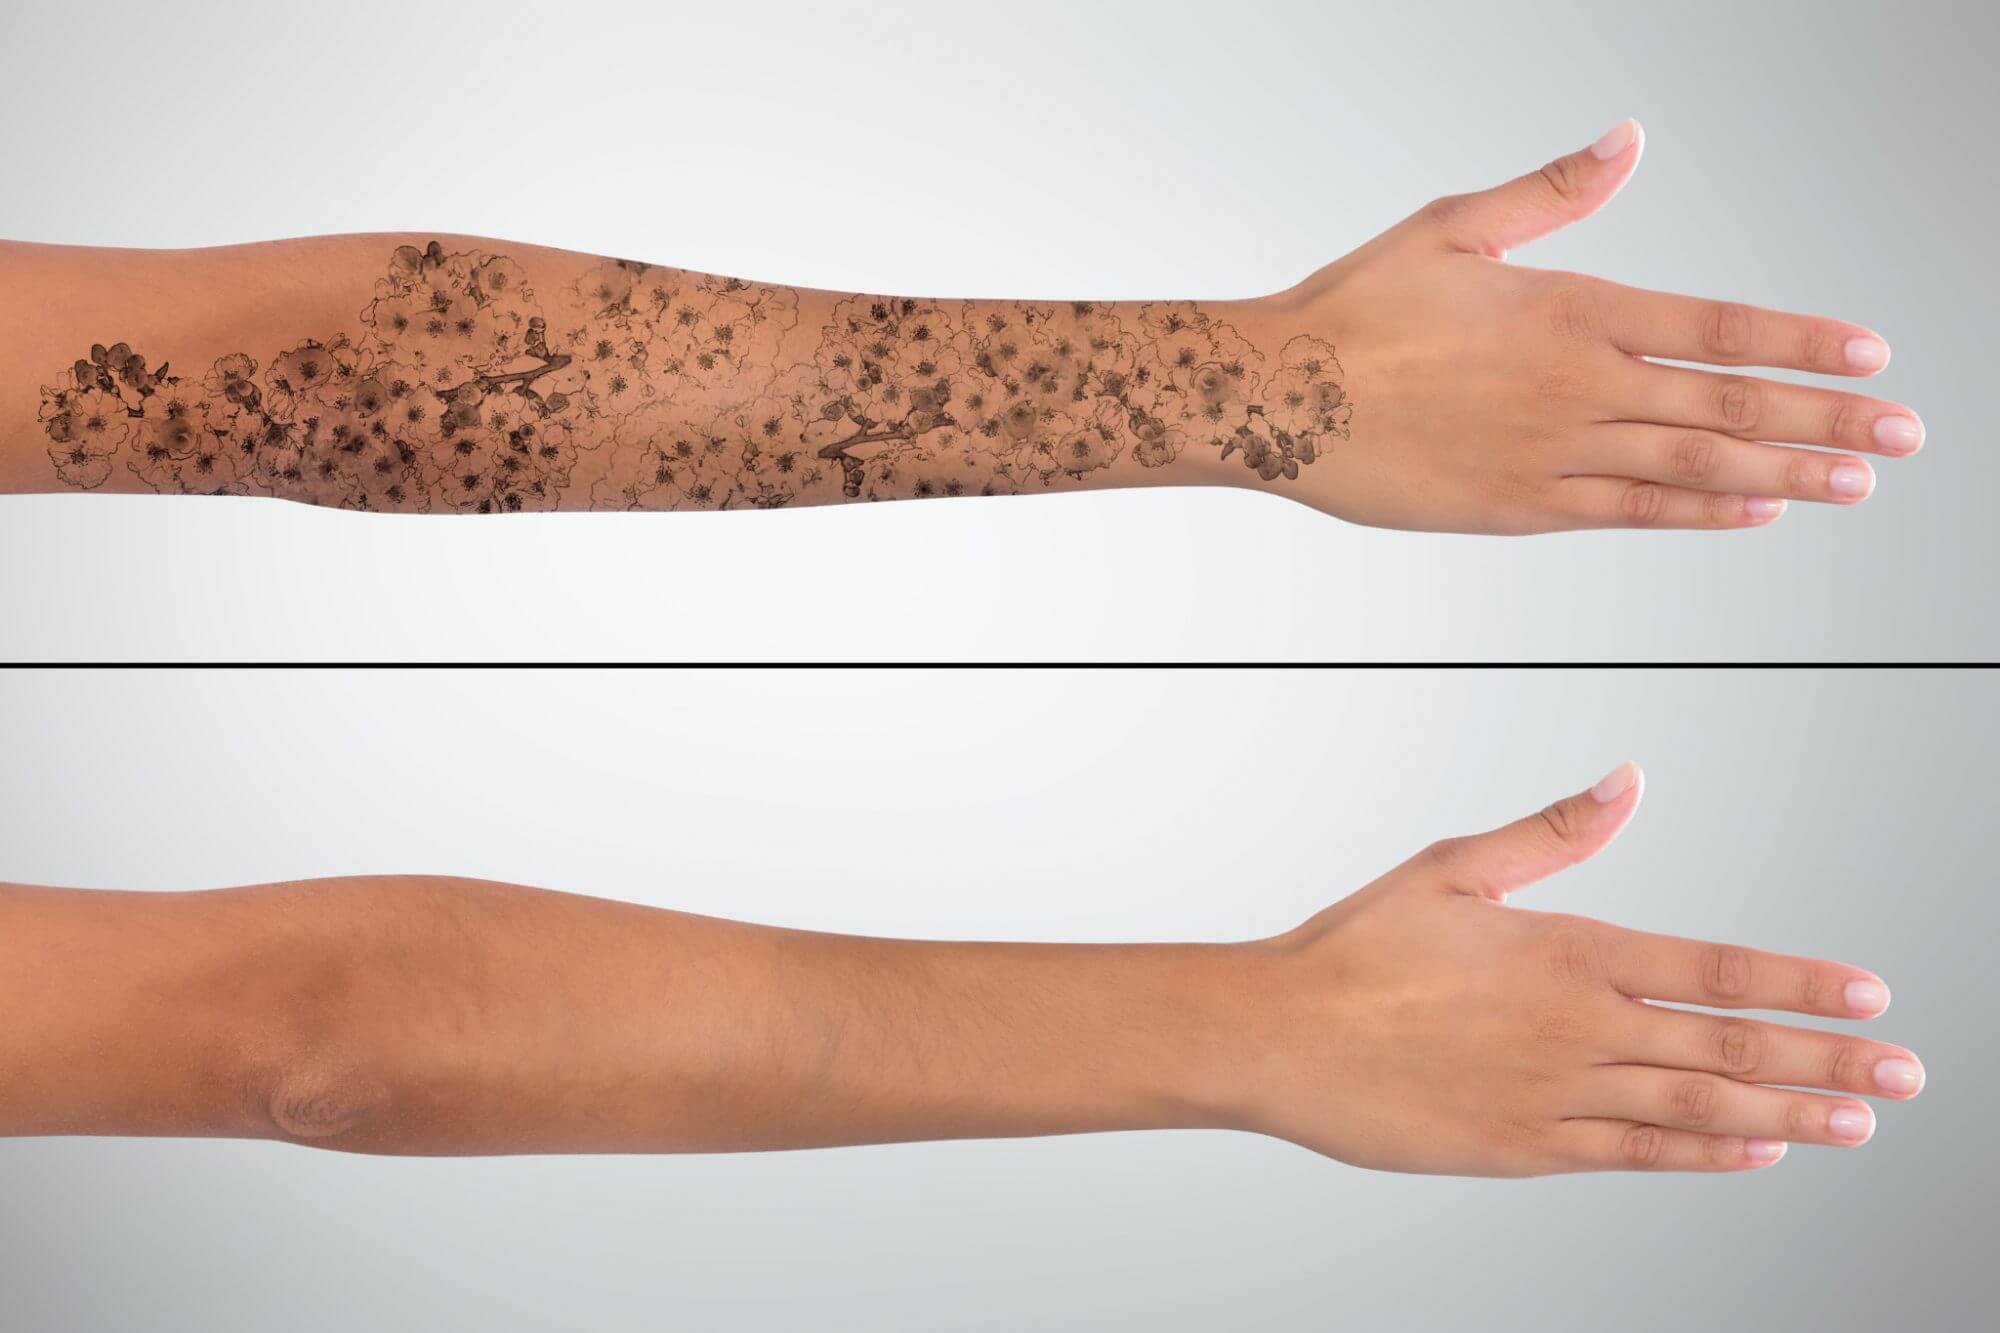 The PicoWay® Laser—The Next Level of Tattoo Removal | Precision MD Blog